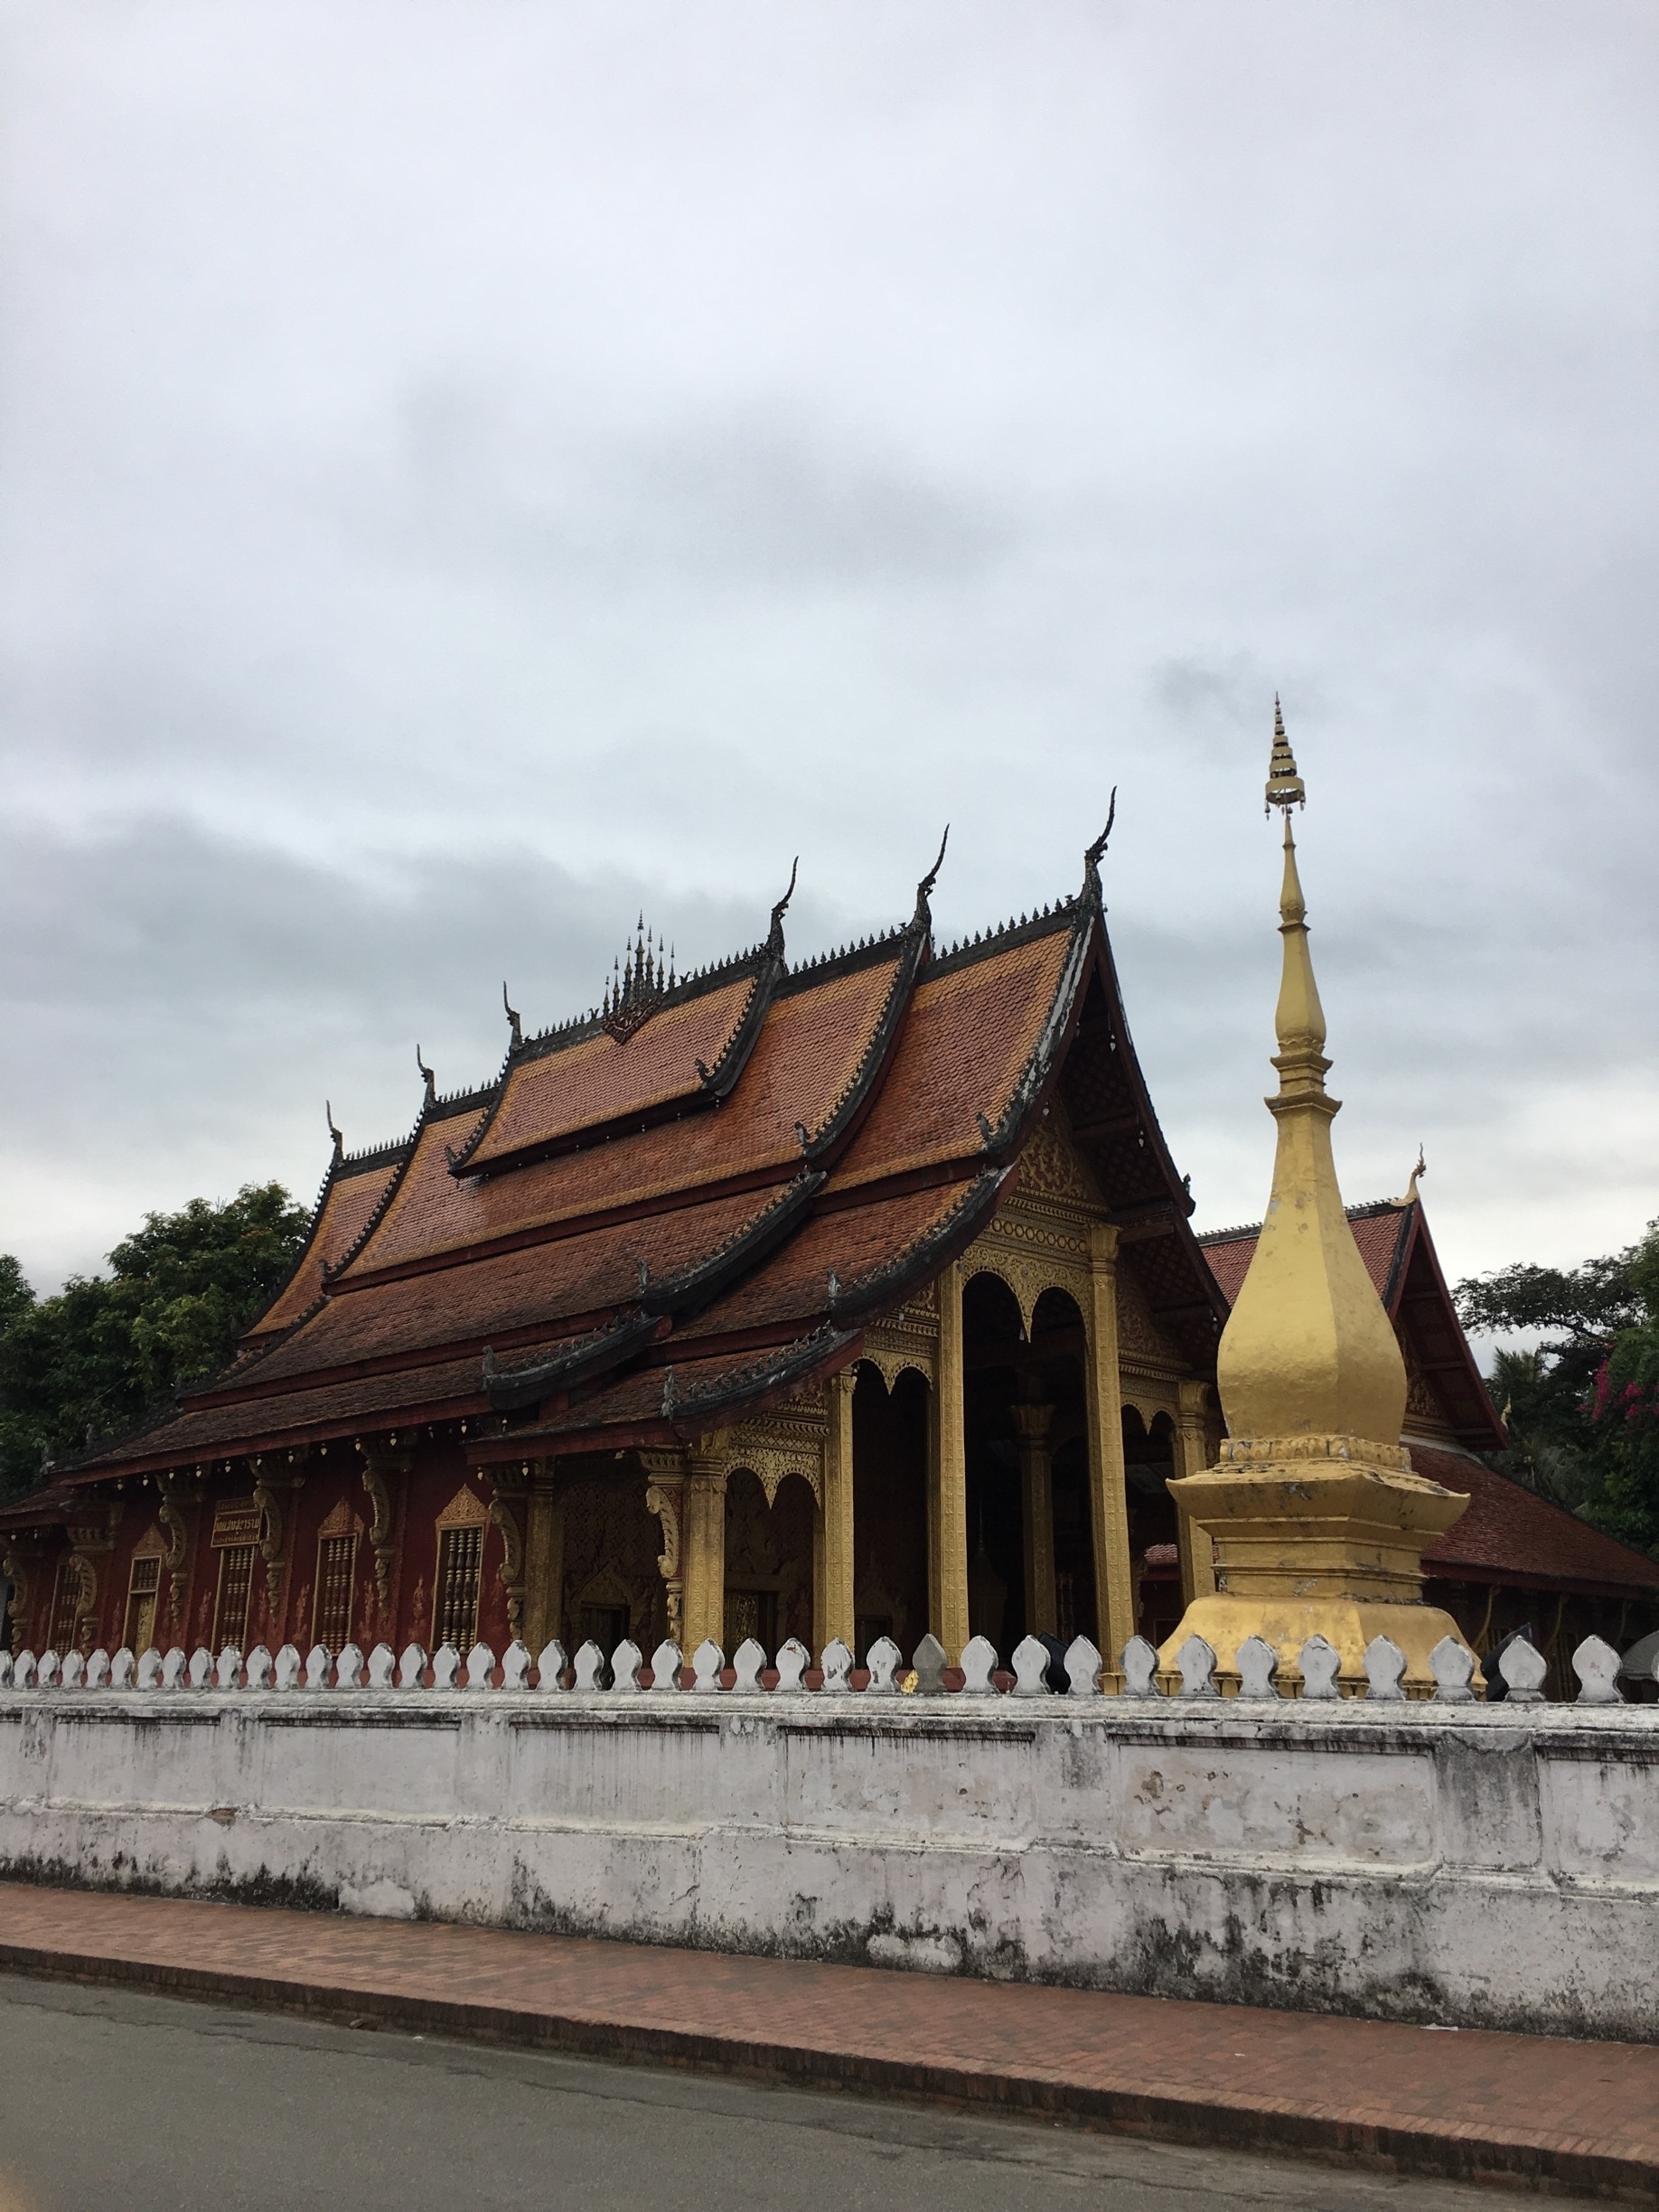 Luang Prabang is a charming UNESCO World Heritage City that is just made for a walking tour. Quaint temples line the main road. There you will also find cozy French cafes and interesting souvenir shops. This is a slow-life kind of place that you will fall in love with.